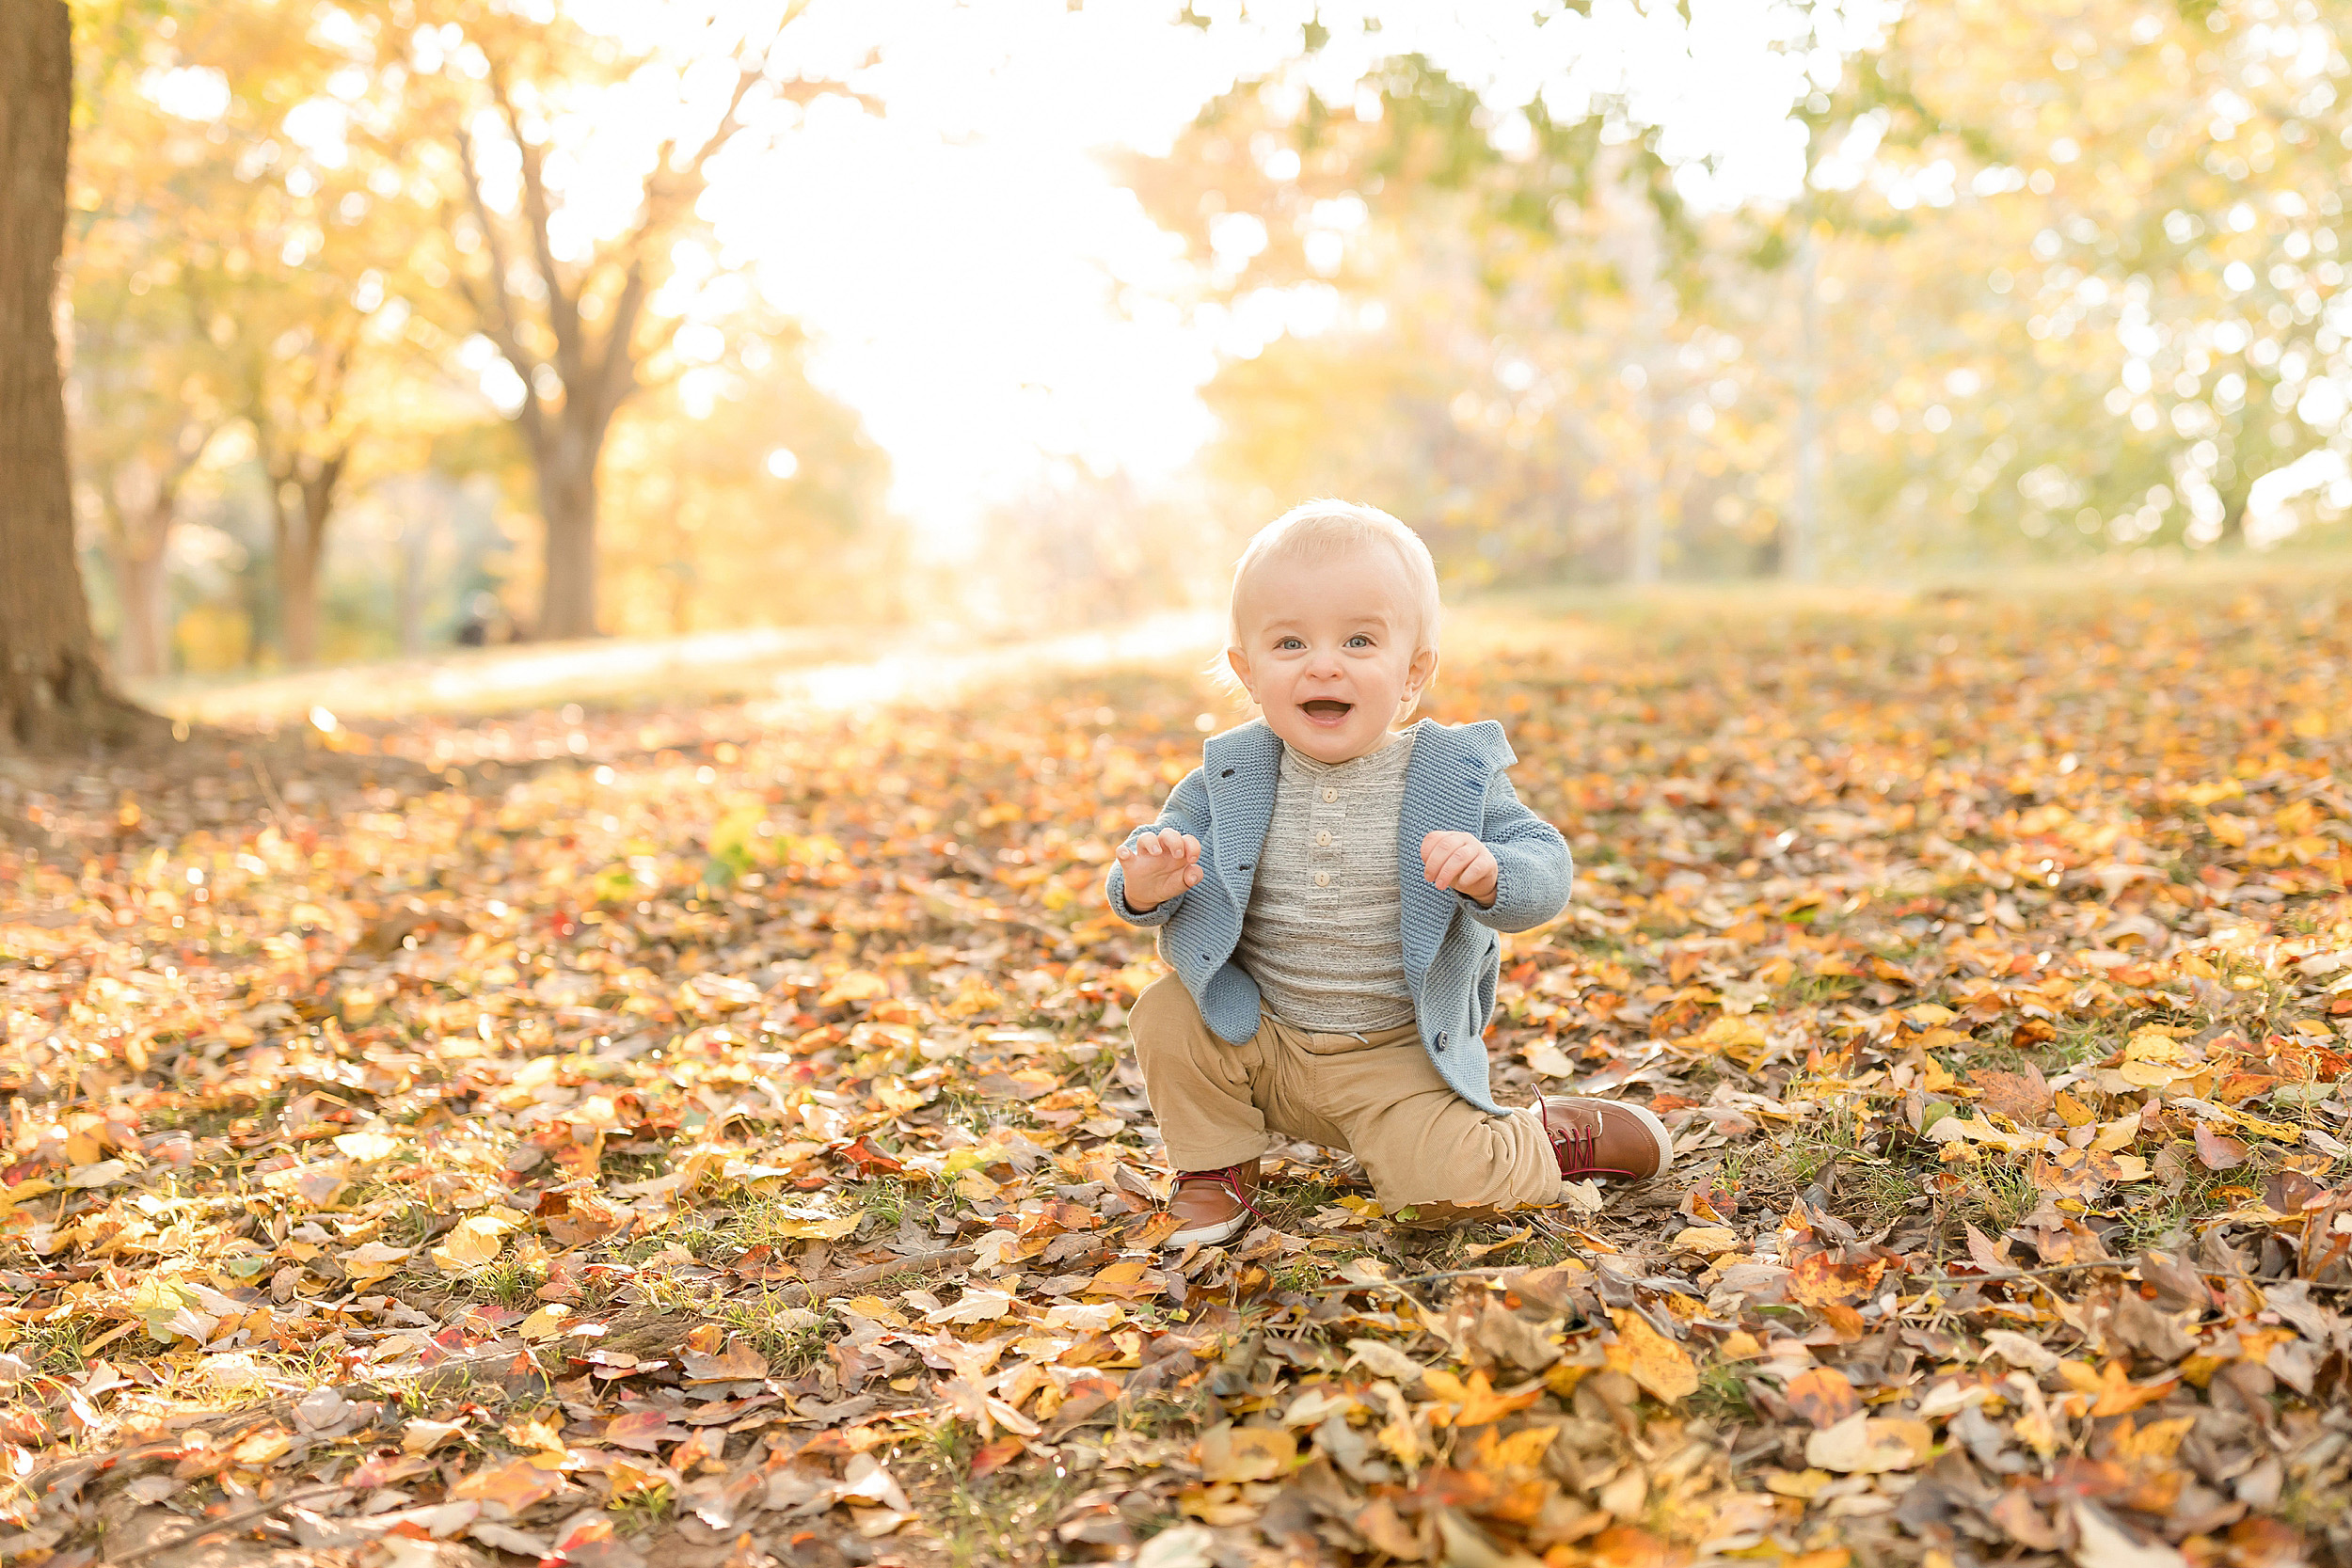 atlanta-brookhaven-decatur-sandy-springs-buckhead-virginia-highlands-west-end-decatur-lily-sophia-photography-ukraine-family-one-year-old-first-birthday-baby-boy-outdoor-fall-cake-smash_1533.jpg